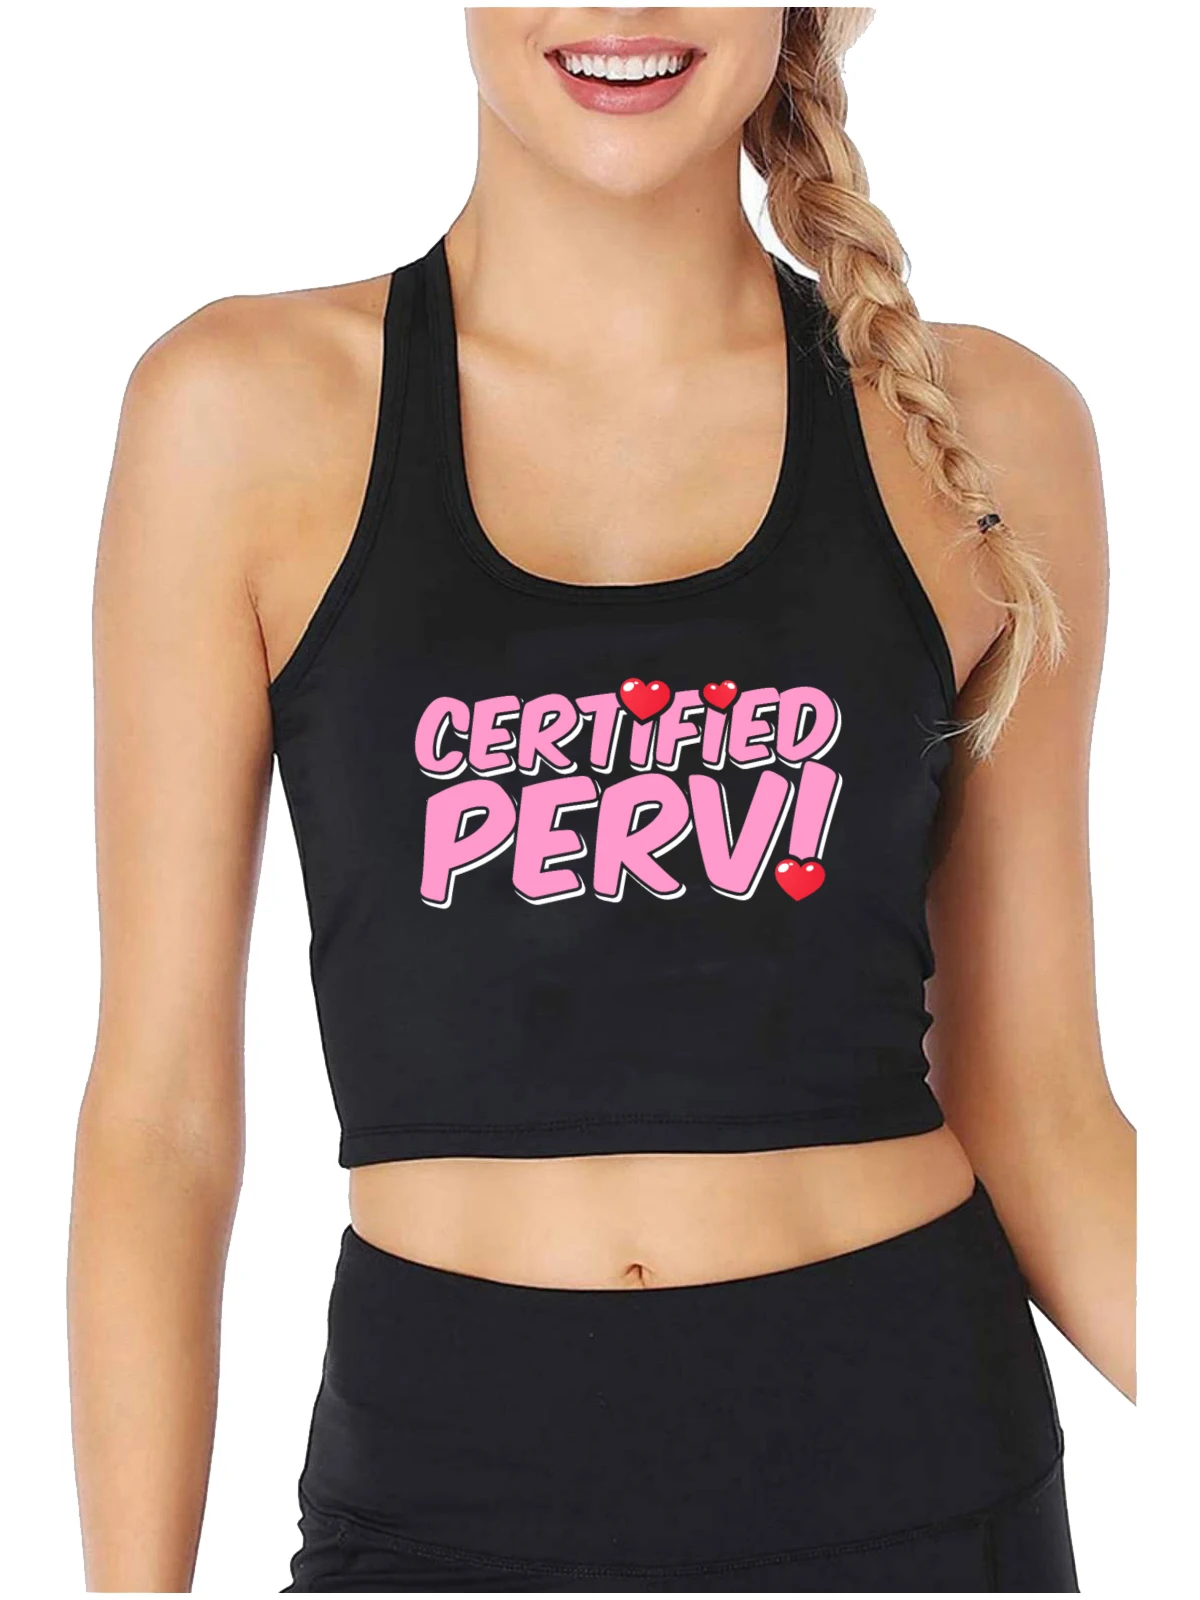 

Certified Perv Humor Fun Flirting Design Sexy Fit Crop Top Hotwife Naughty BDSM Dom Sub Kinky Style Tank Tops Swinger Camisole